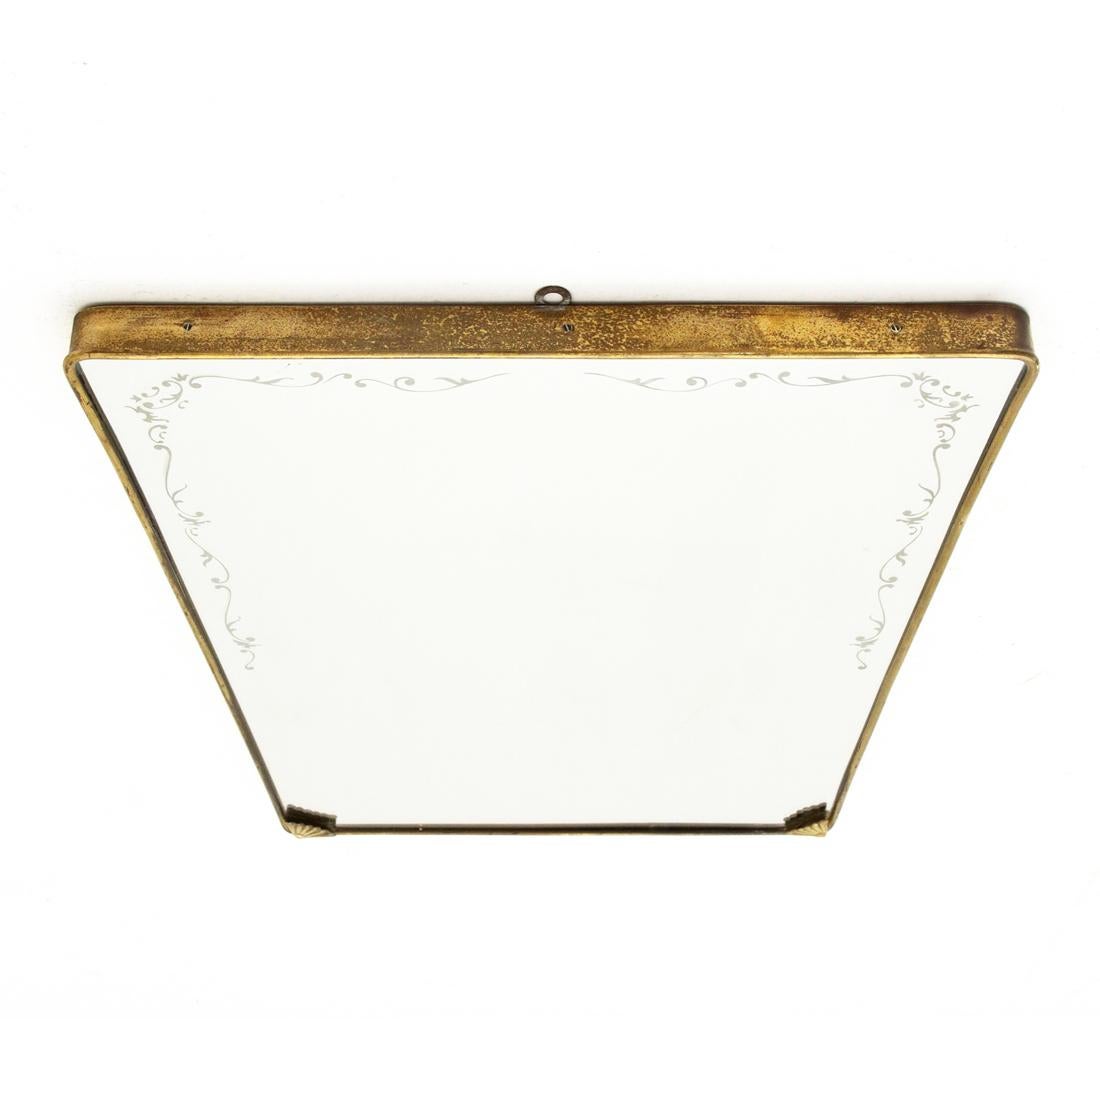 Mid-20th Century Italian Modern Brass Mirror with Decorations, 1950s For Sale